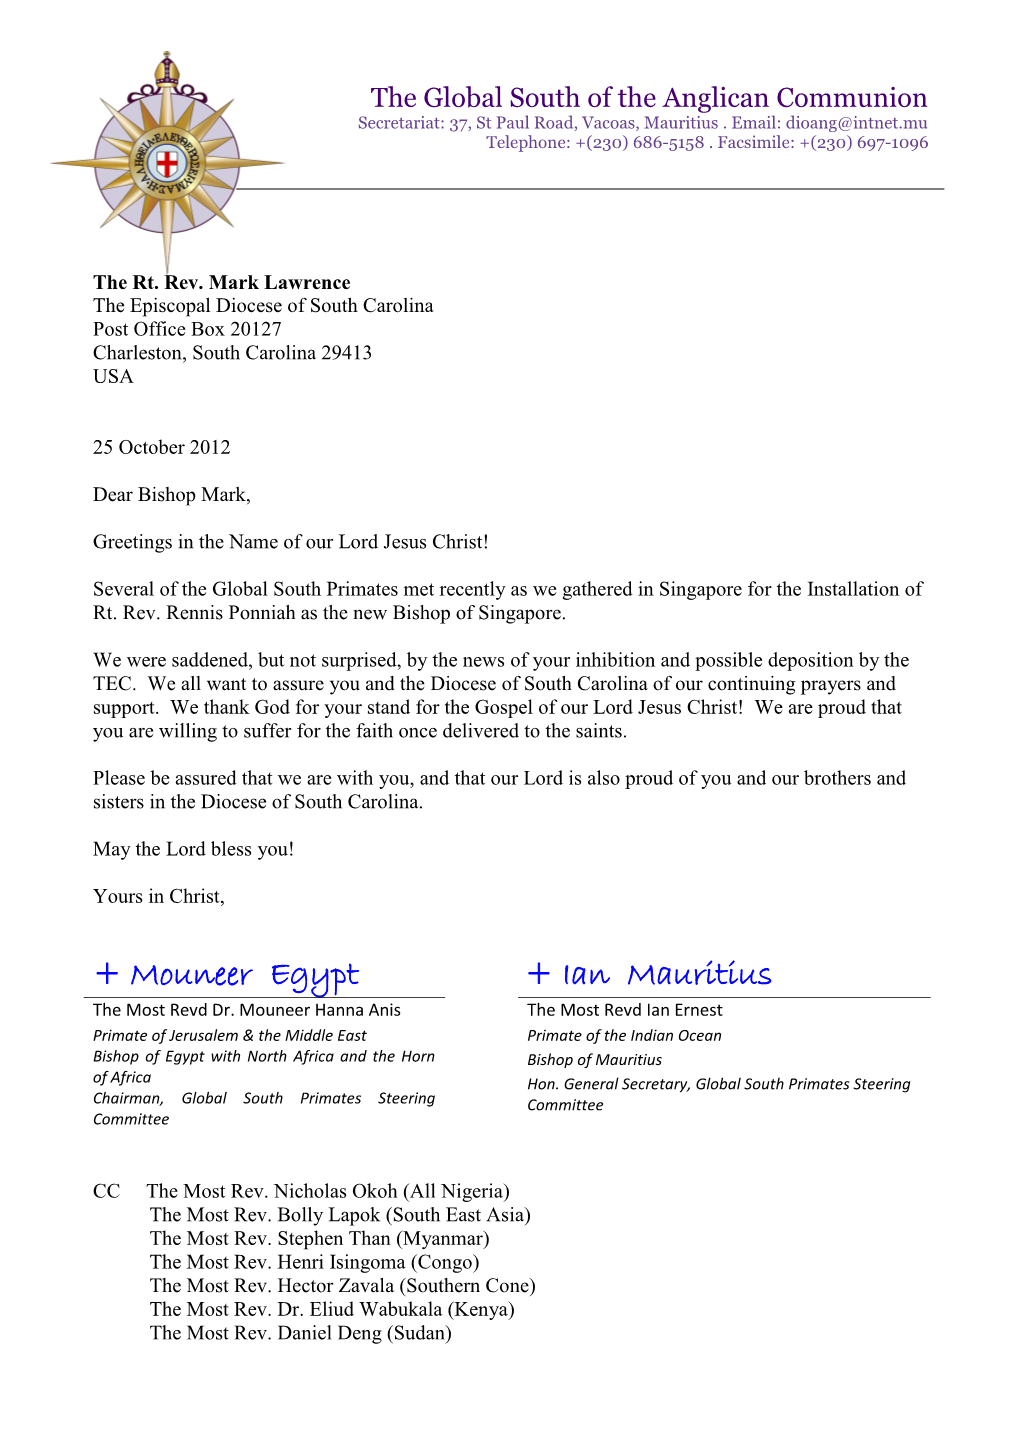 Letter of Support from Global South Primates Following Lawrence's